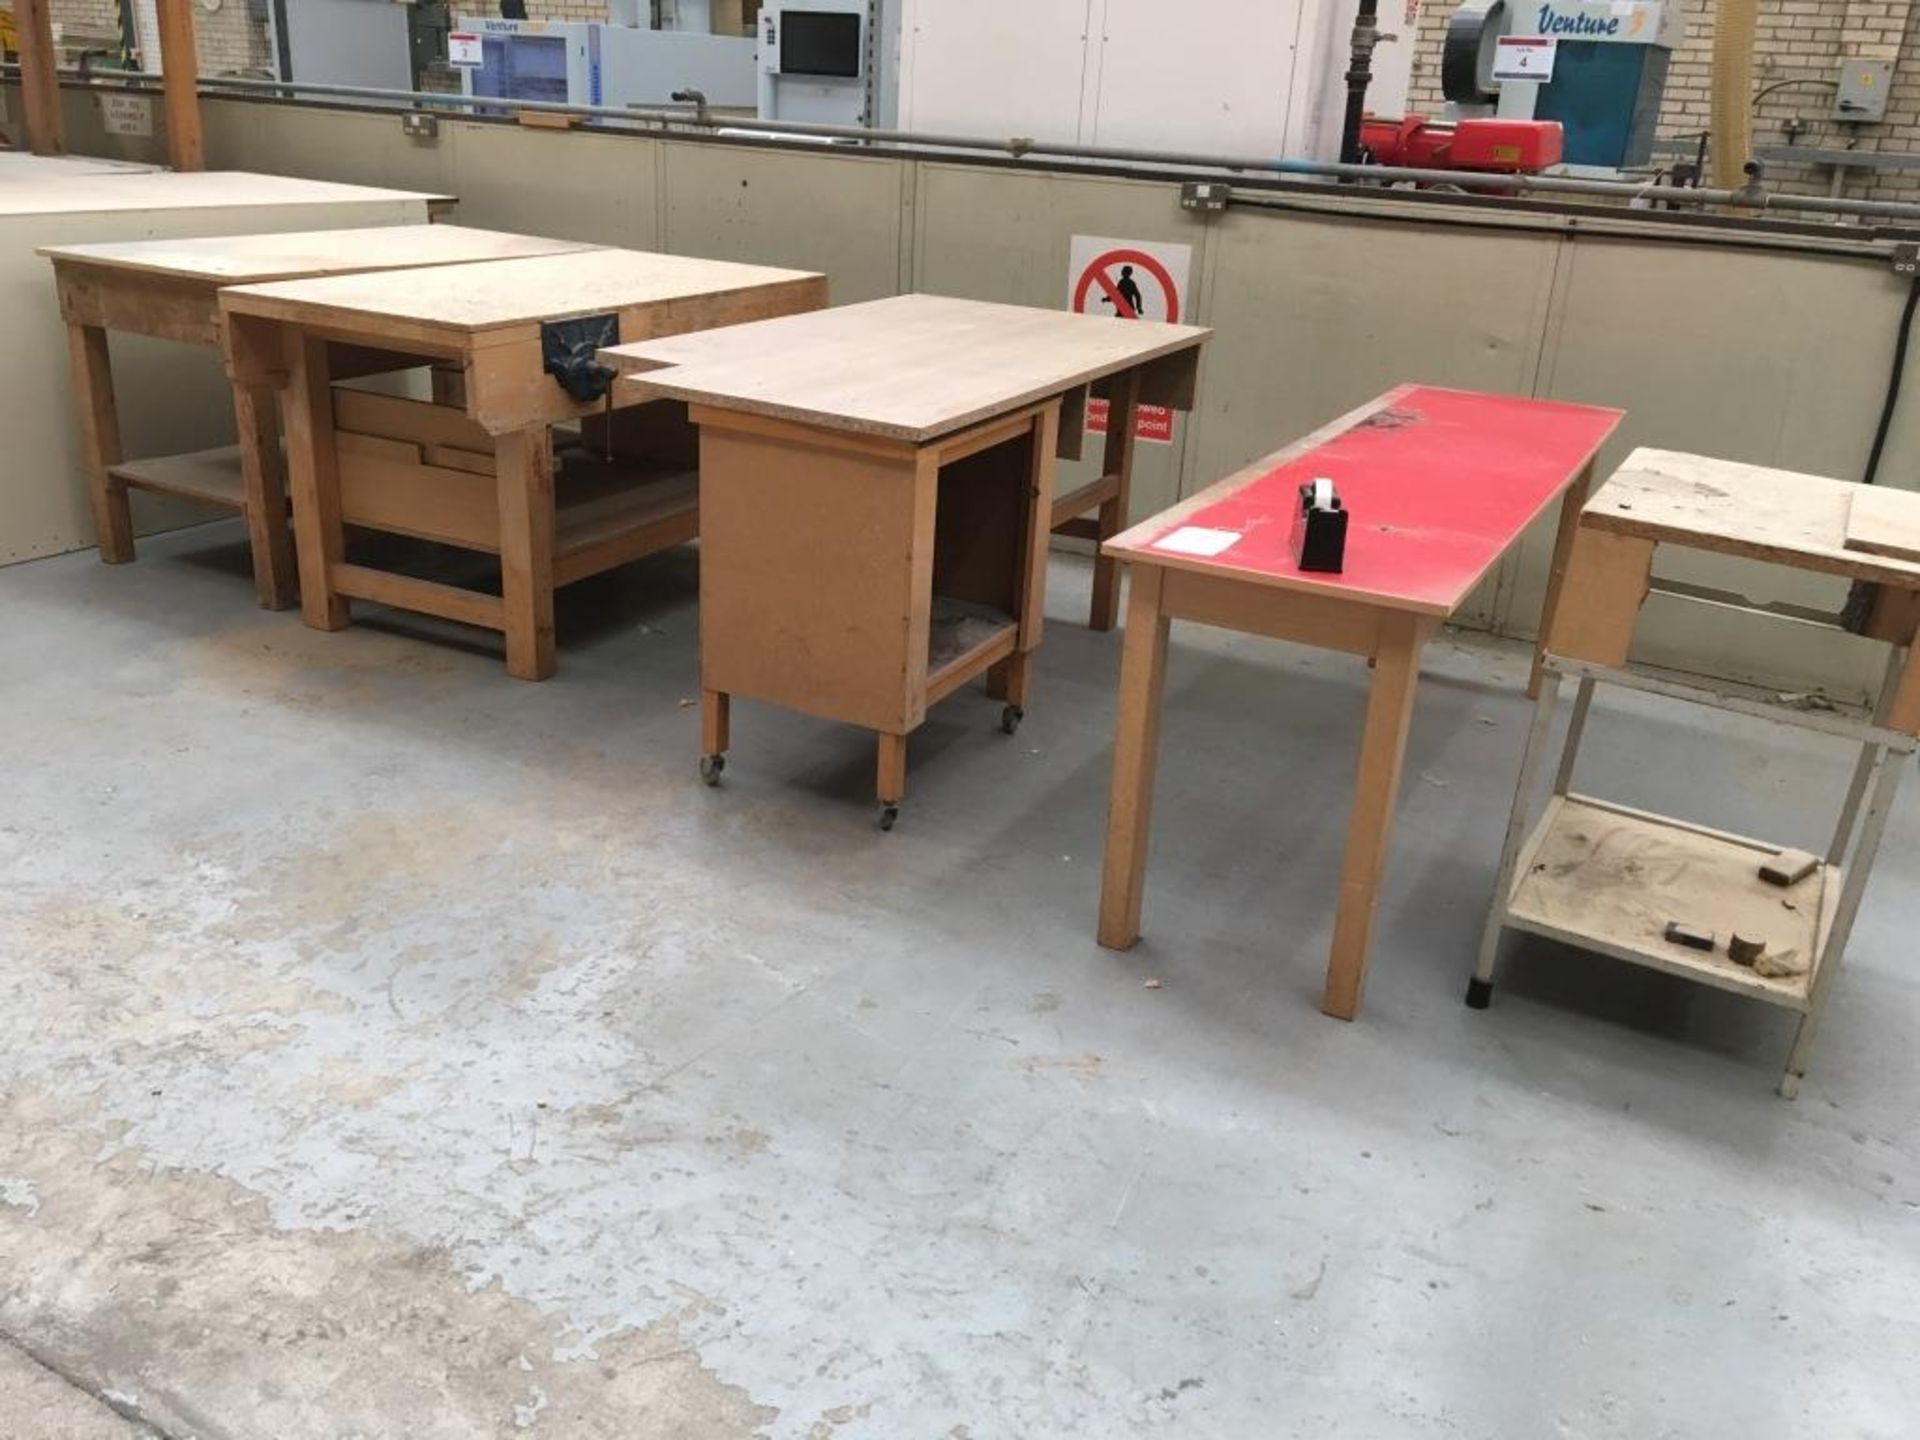 Five wooden works benches (contents not included) - Image 2 of 2